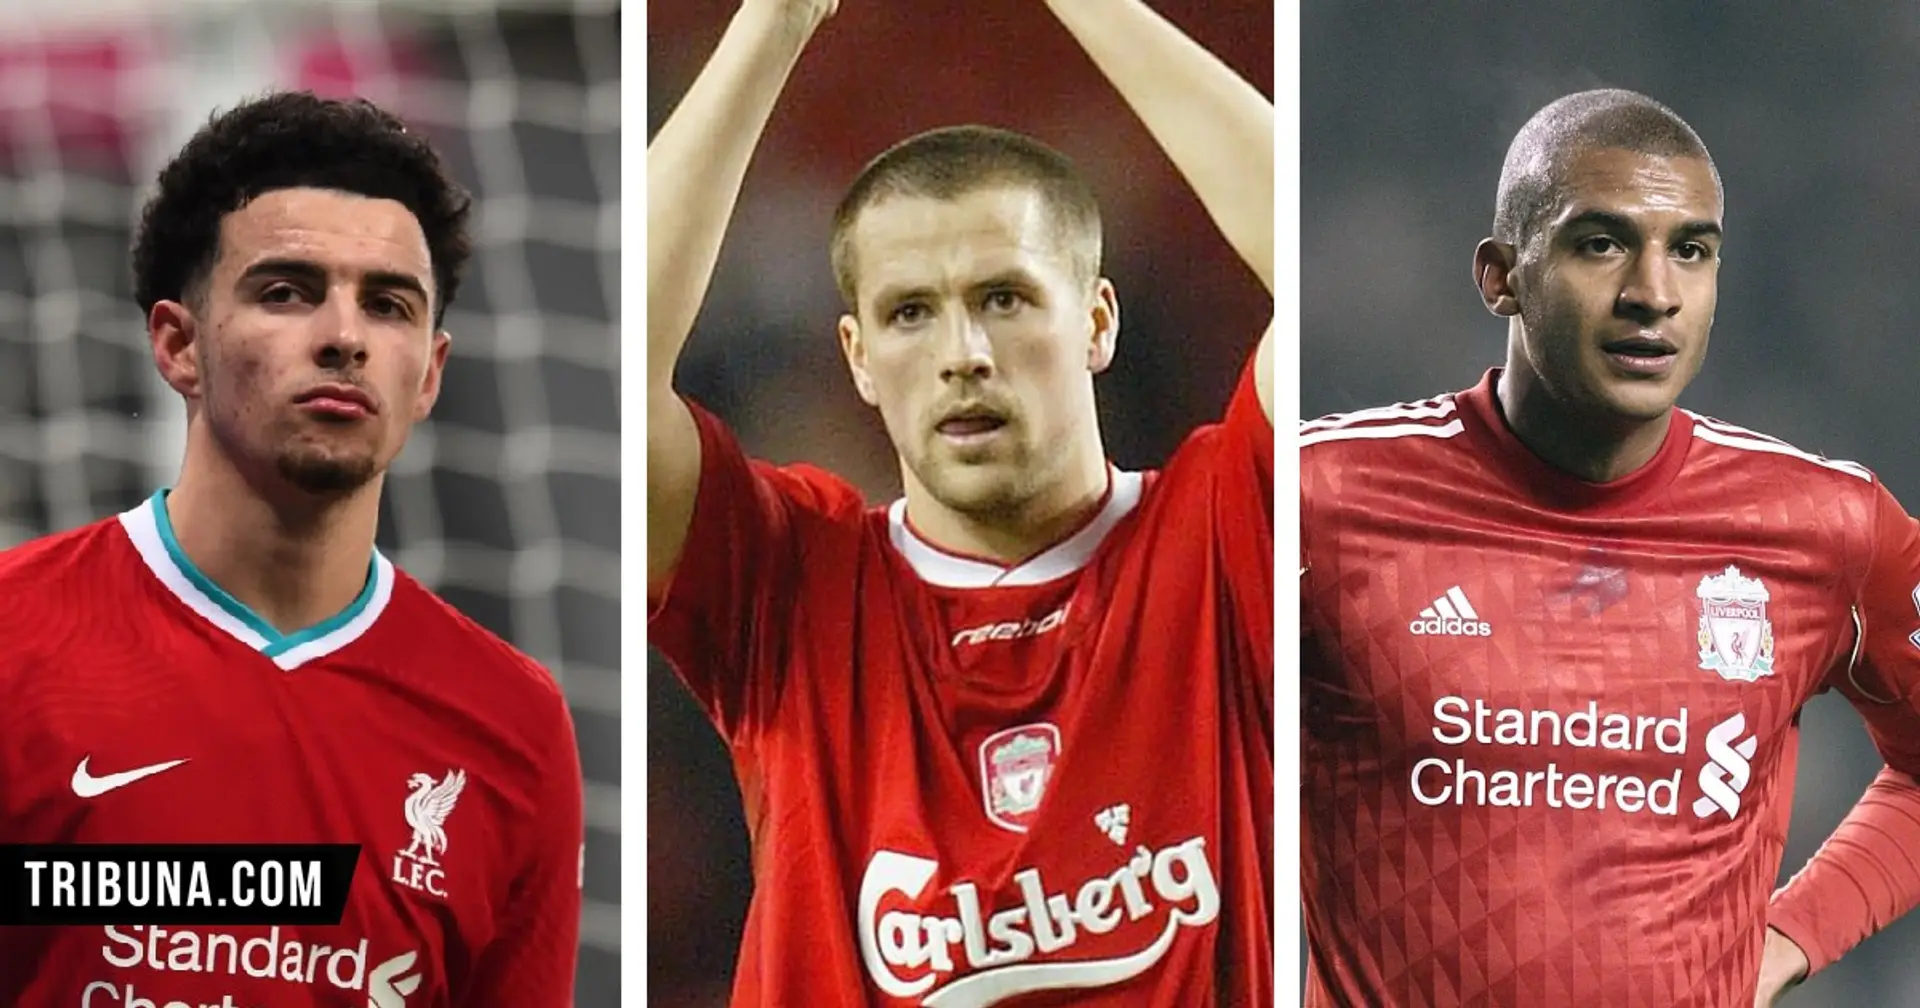 Michael Owen, Curtis Jones, and 9 more players who scored for Liverpool in Premier League before turning 20